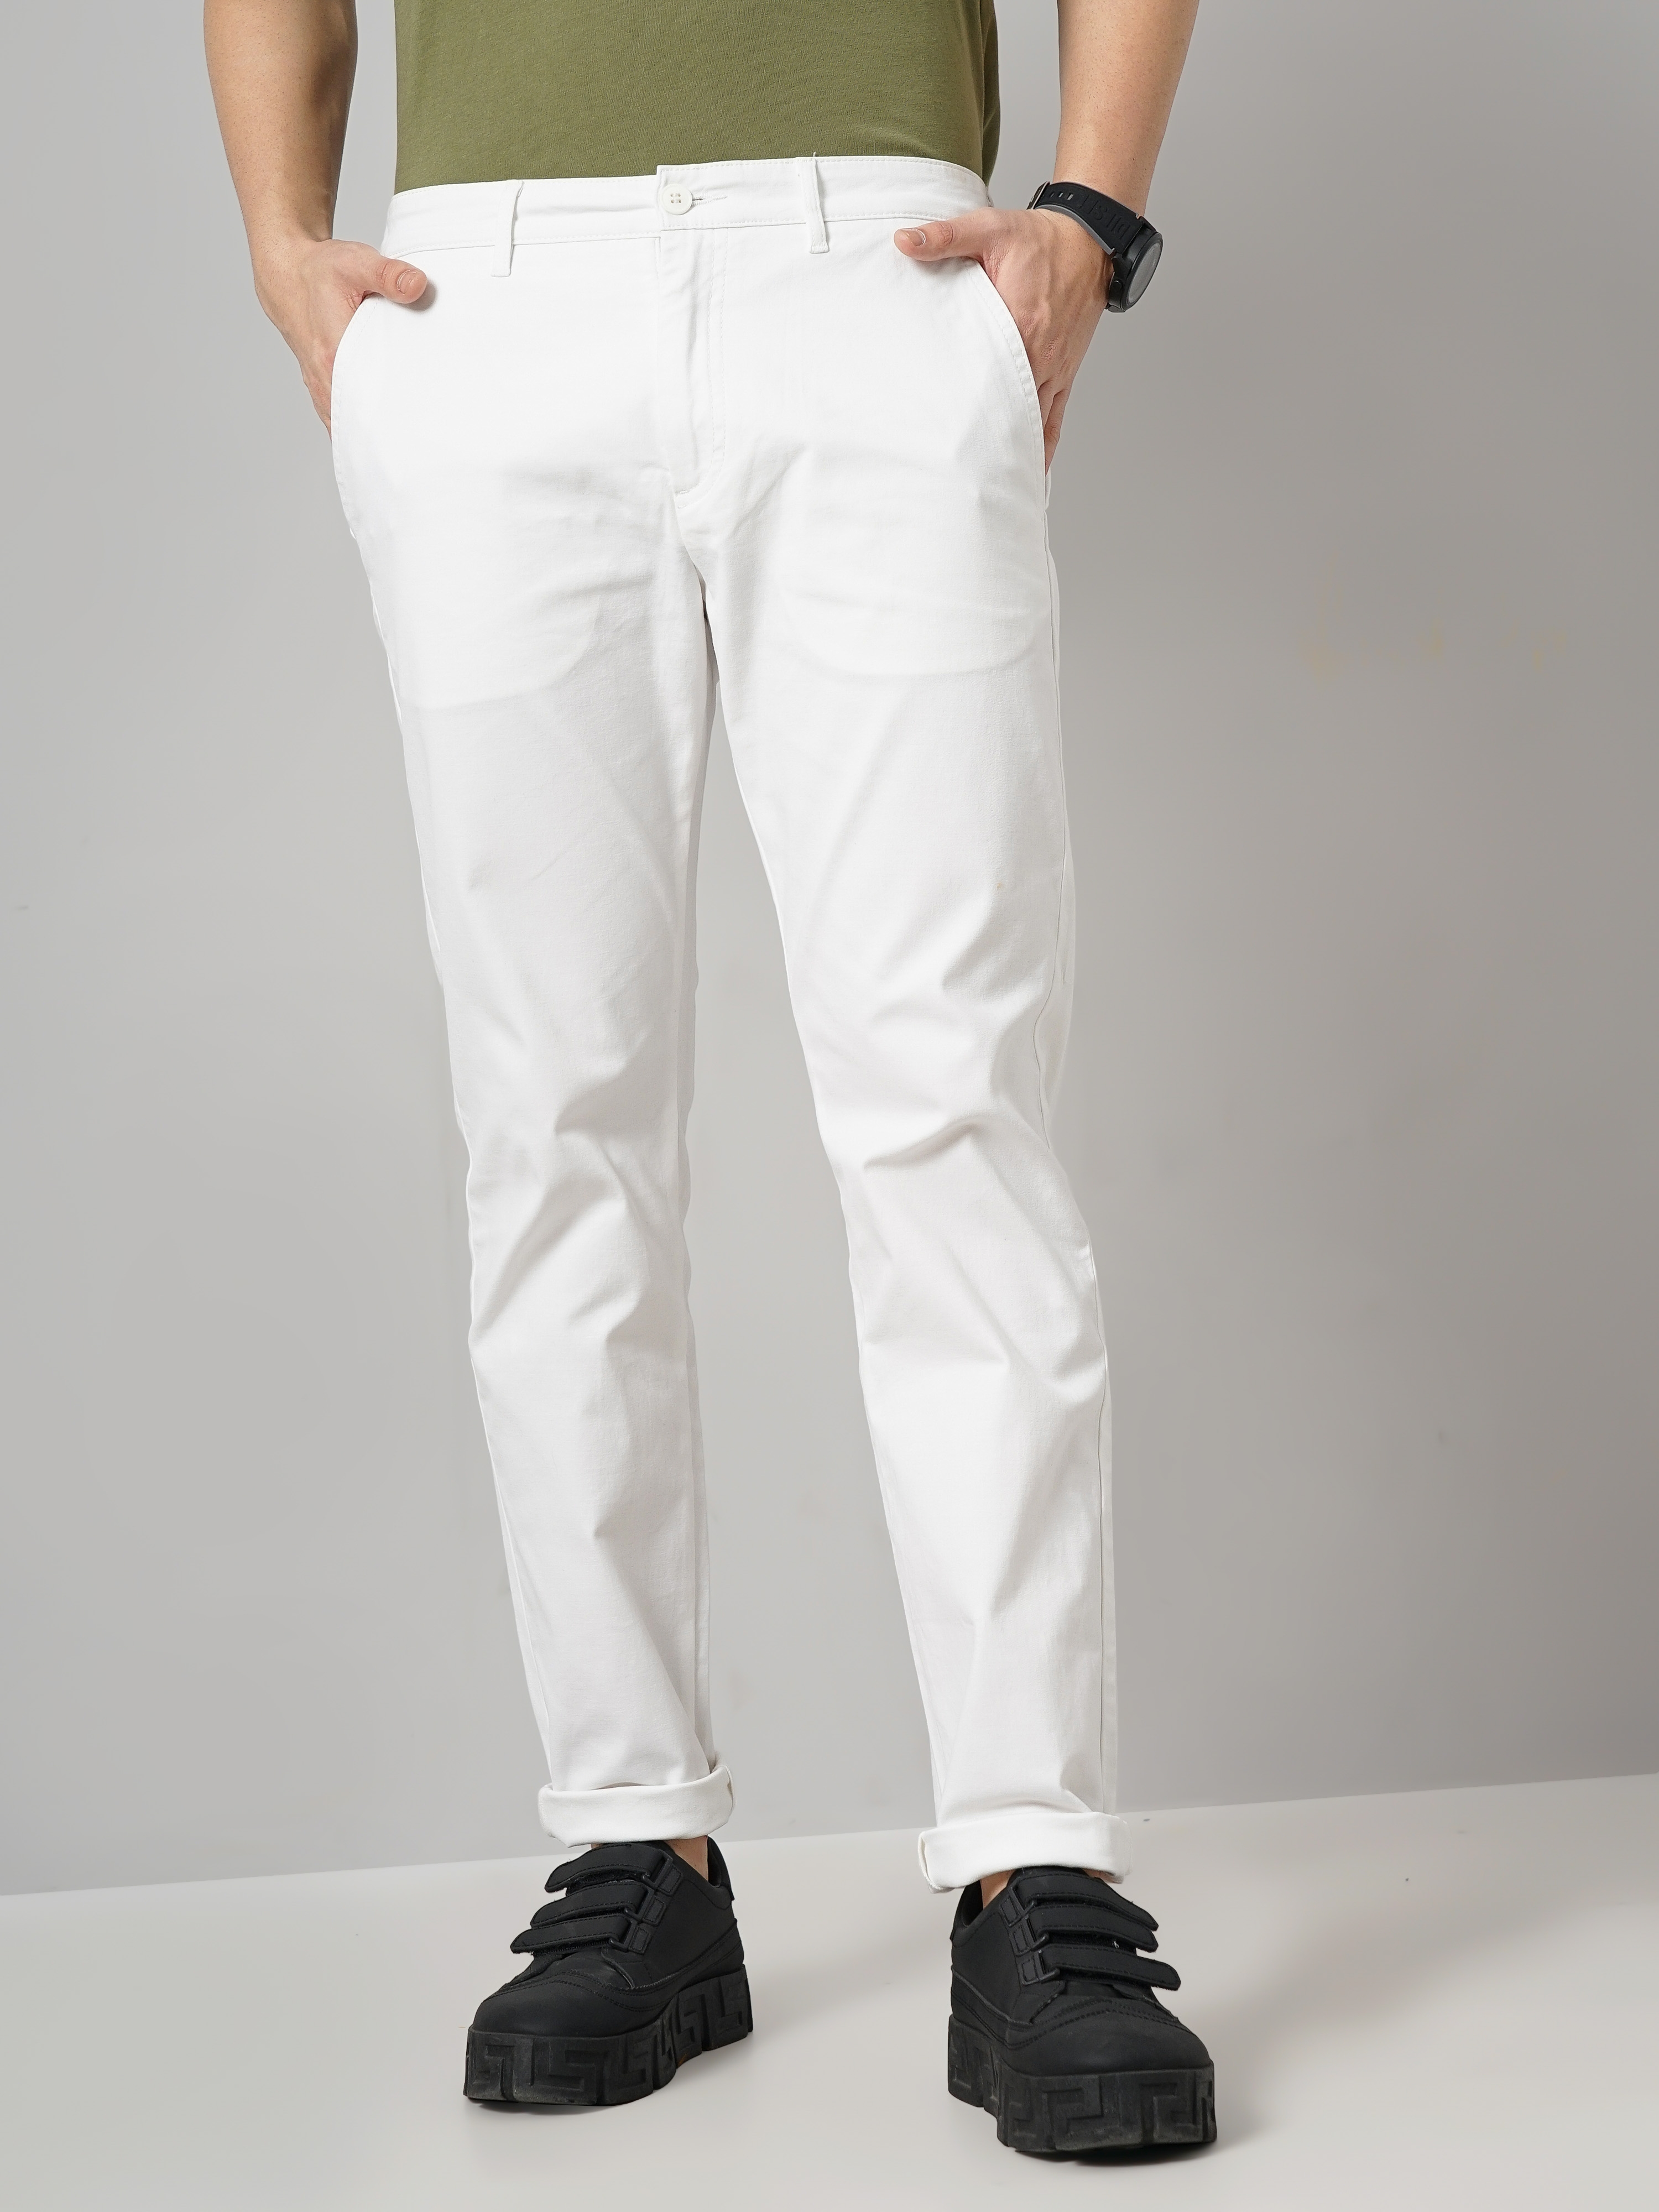 Celio Men Off White Solid Regular Fit Cotton Chino Trousers